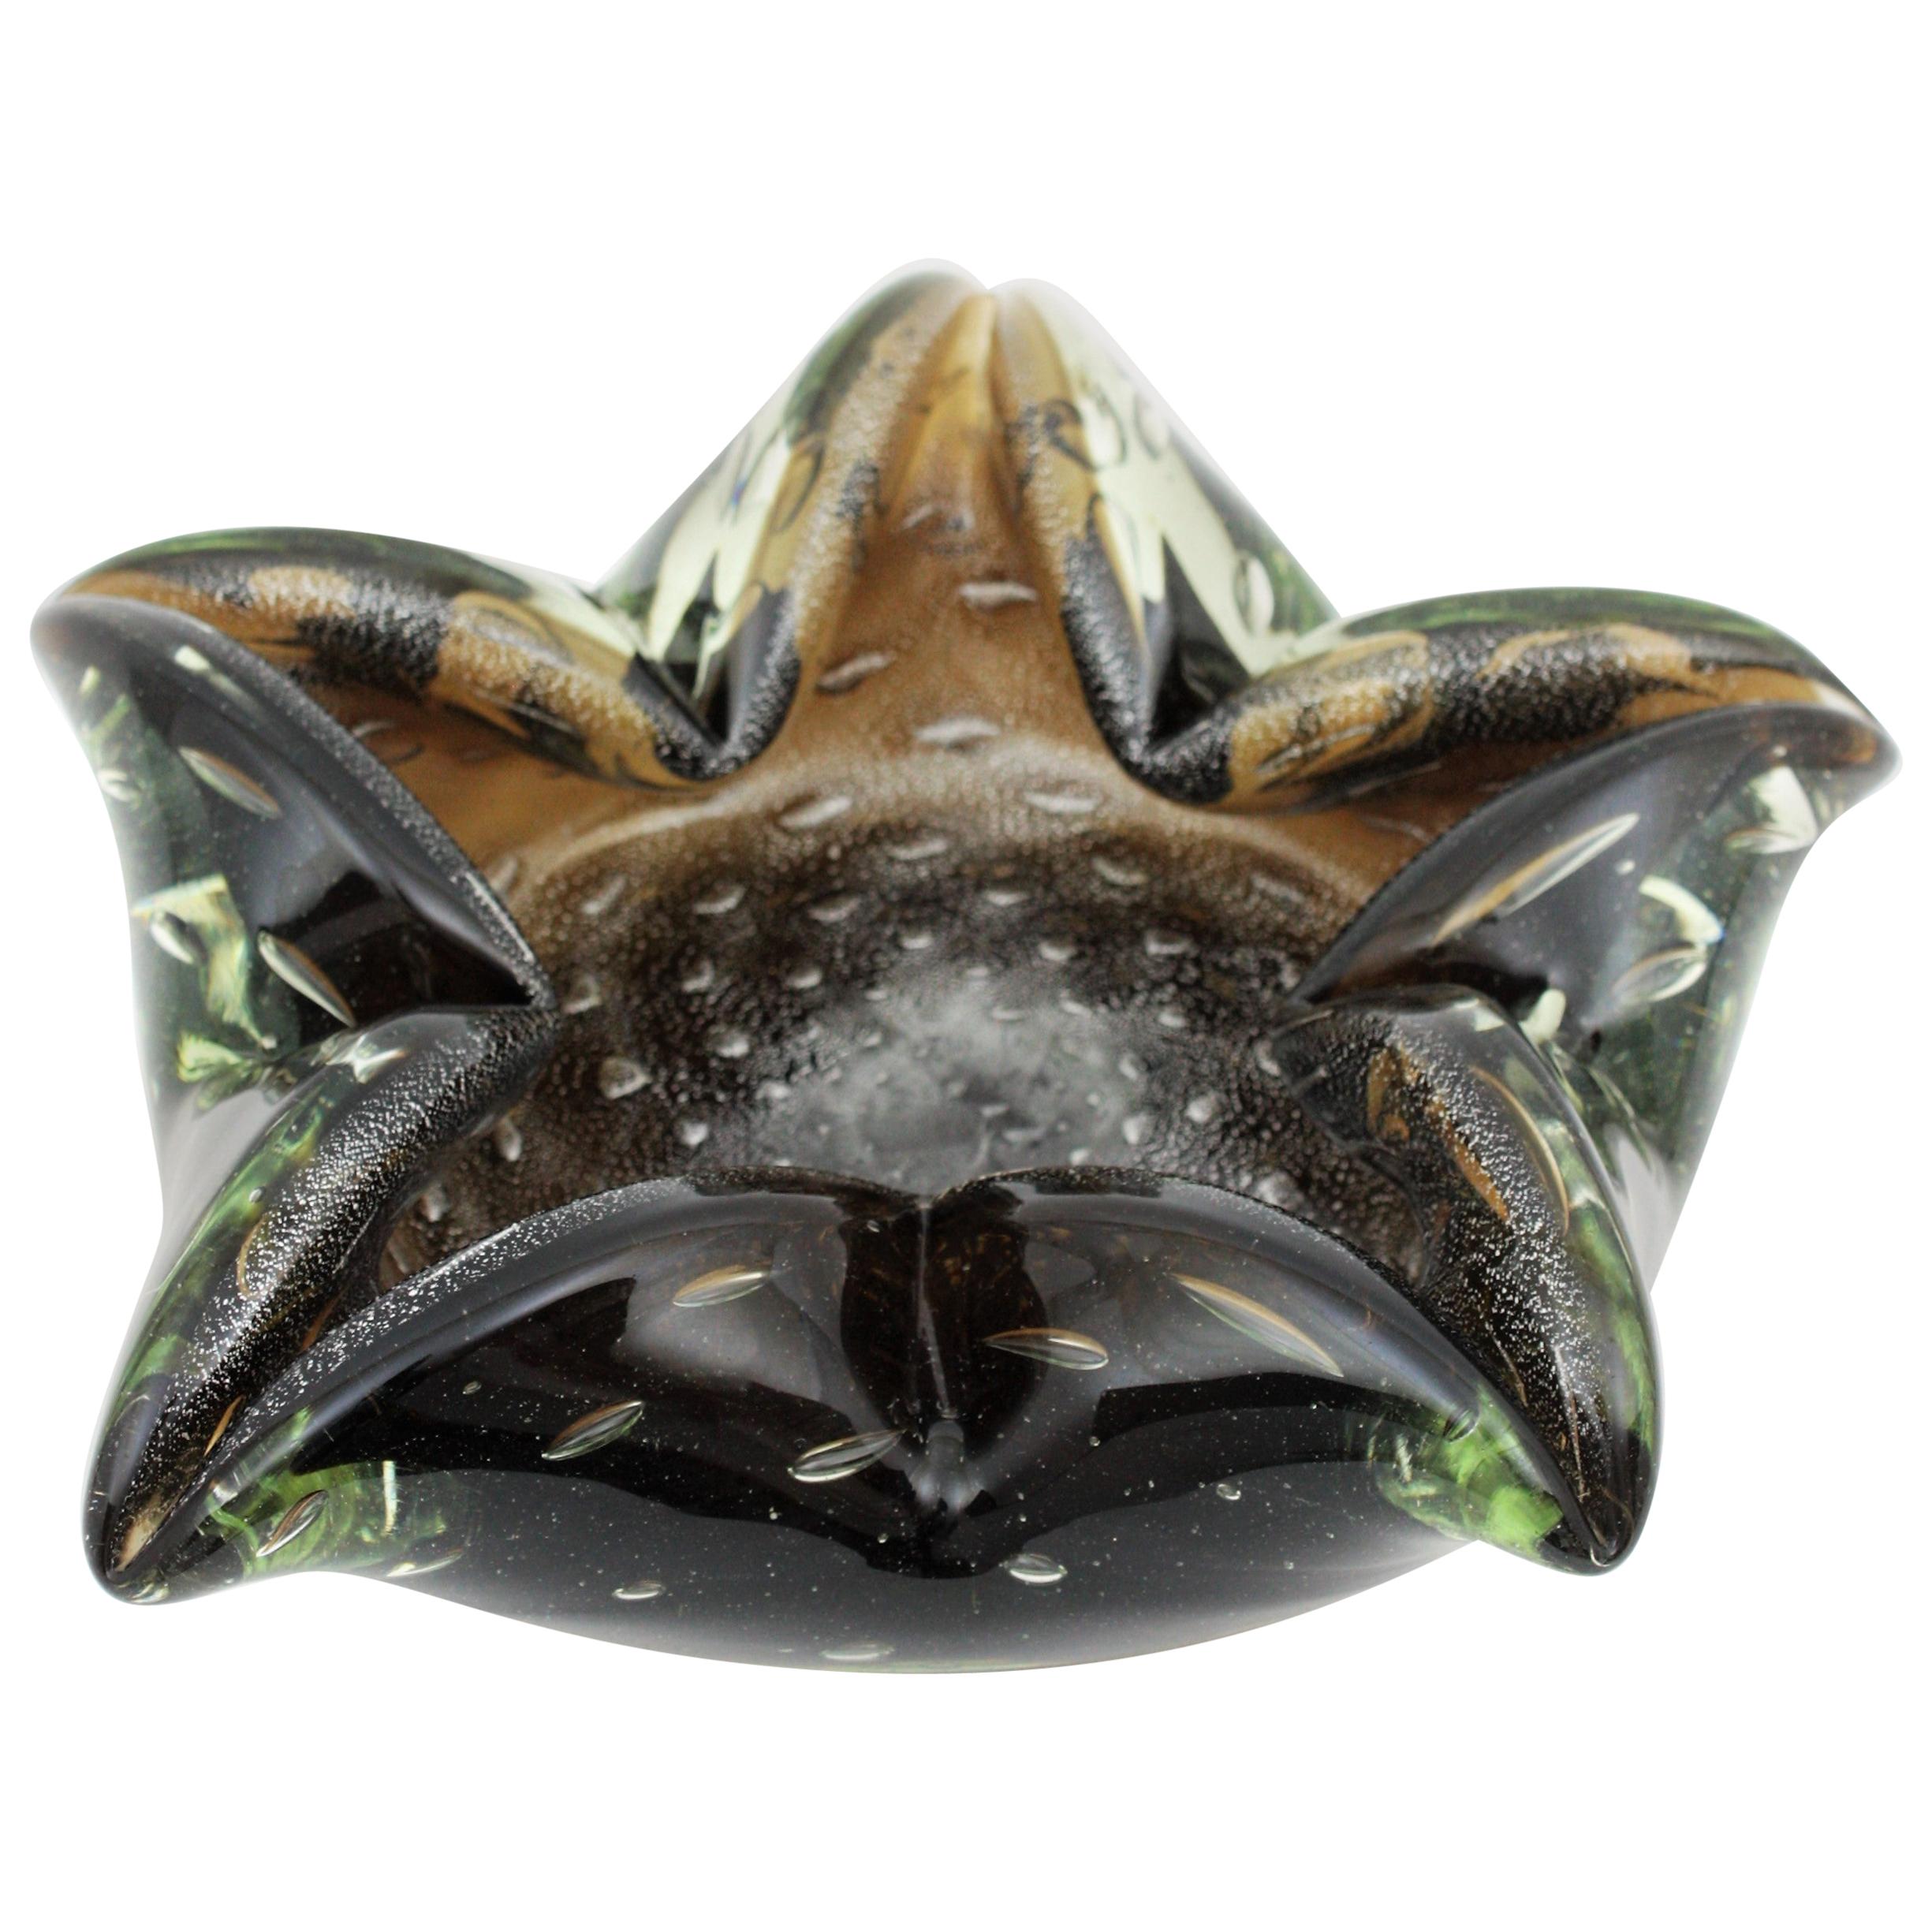 Murano smoked and clear Sommerso star shape glass bowl with silver flecks, Italy, 1950s.
Amazing 5-pointed star shaped hand blown Murano art glass bowl or ashtray made of smoked amber/brown glass cased into clear green glass. It has Aventurine